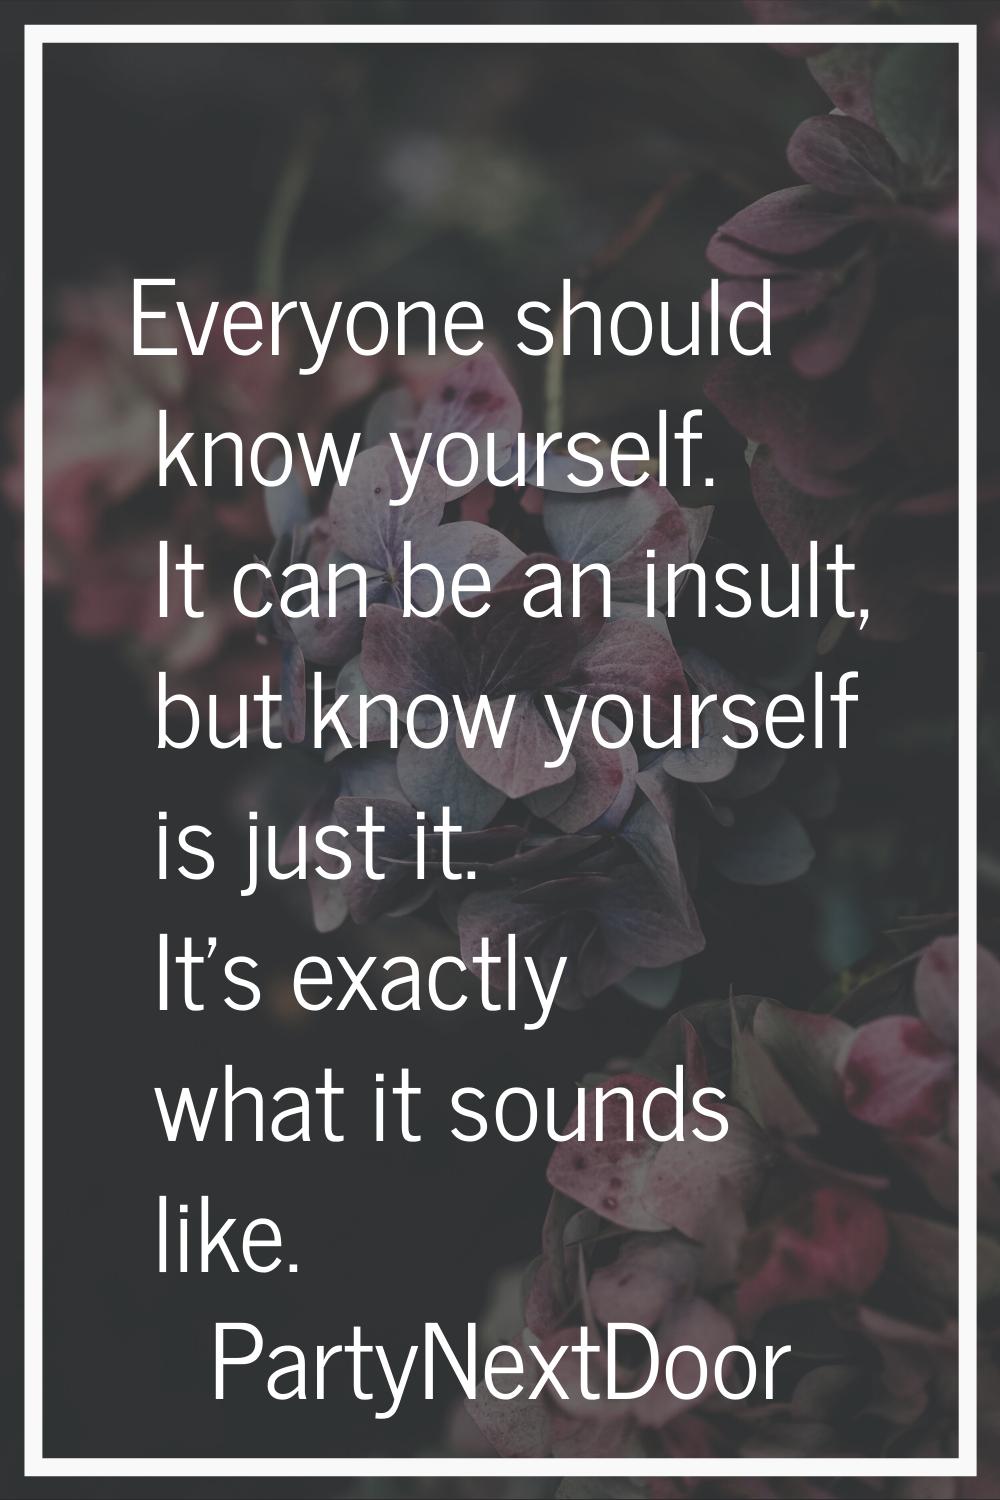 Everyone should know yourself. It can be an insult, but know yourself is just it. It's exactly what